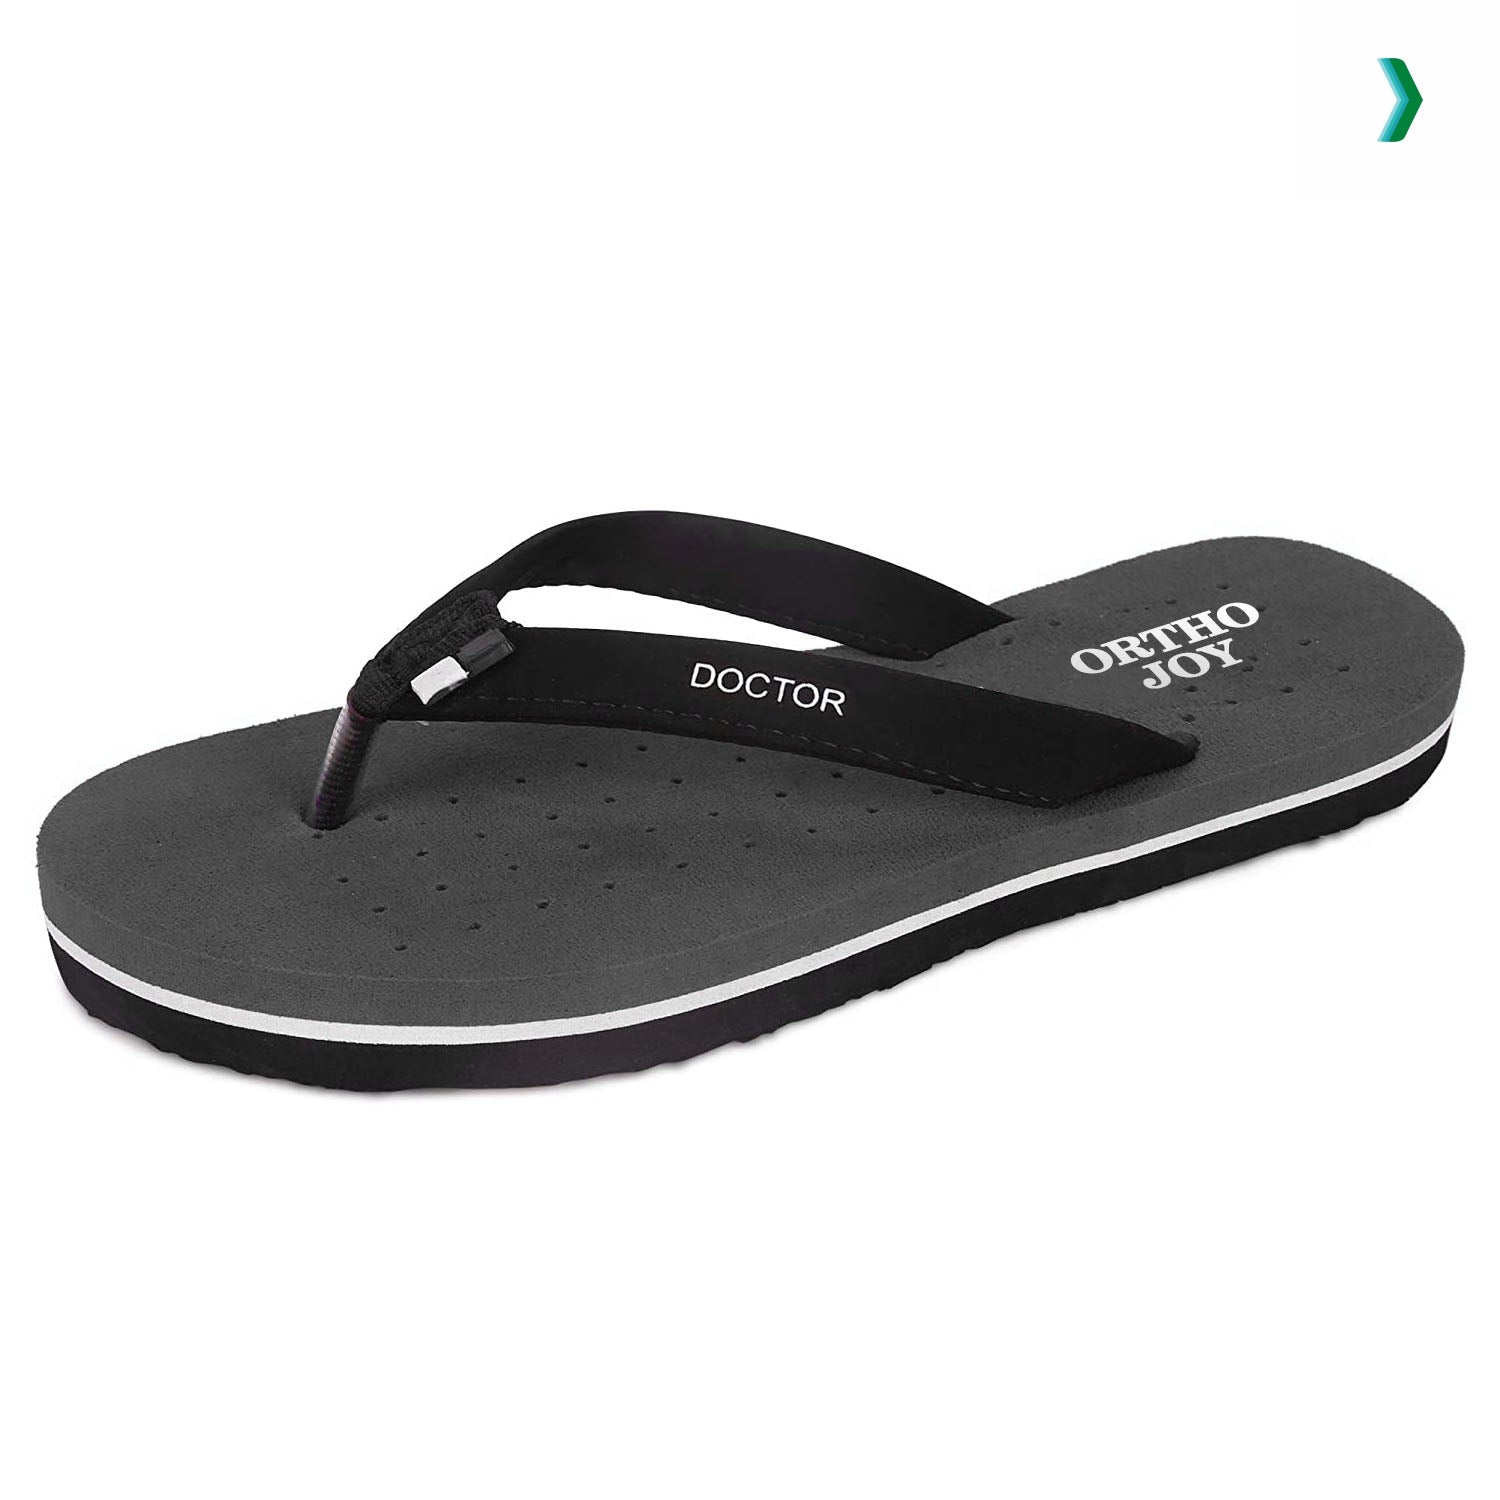 ORTHO JOY Doctor Orthopedic Slippers For Ladies Daily Use.